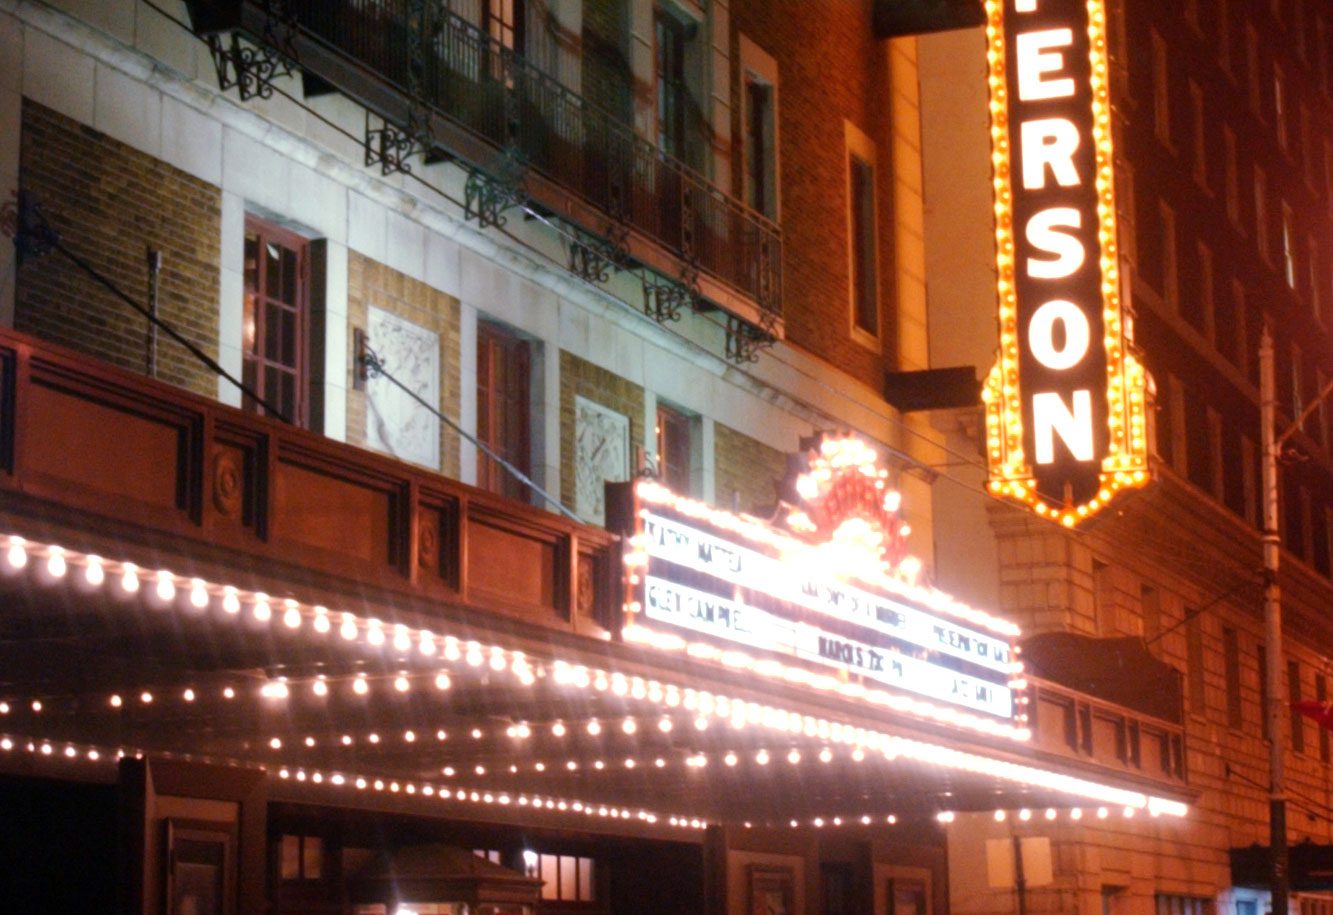 Historic Jefferson Theatre entrance in downtown Beaumont